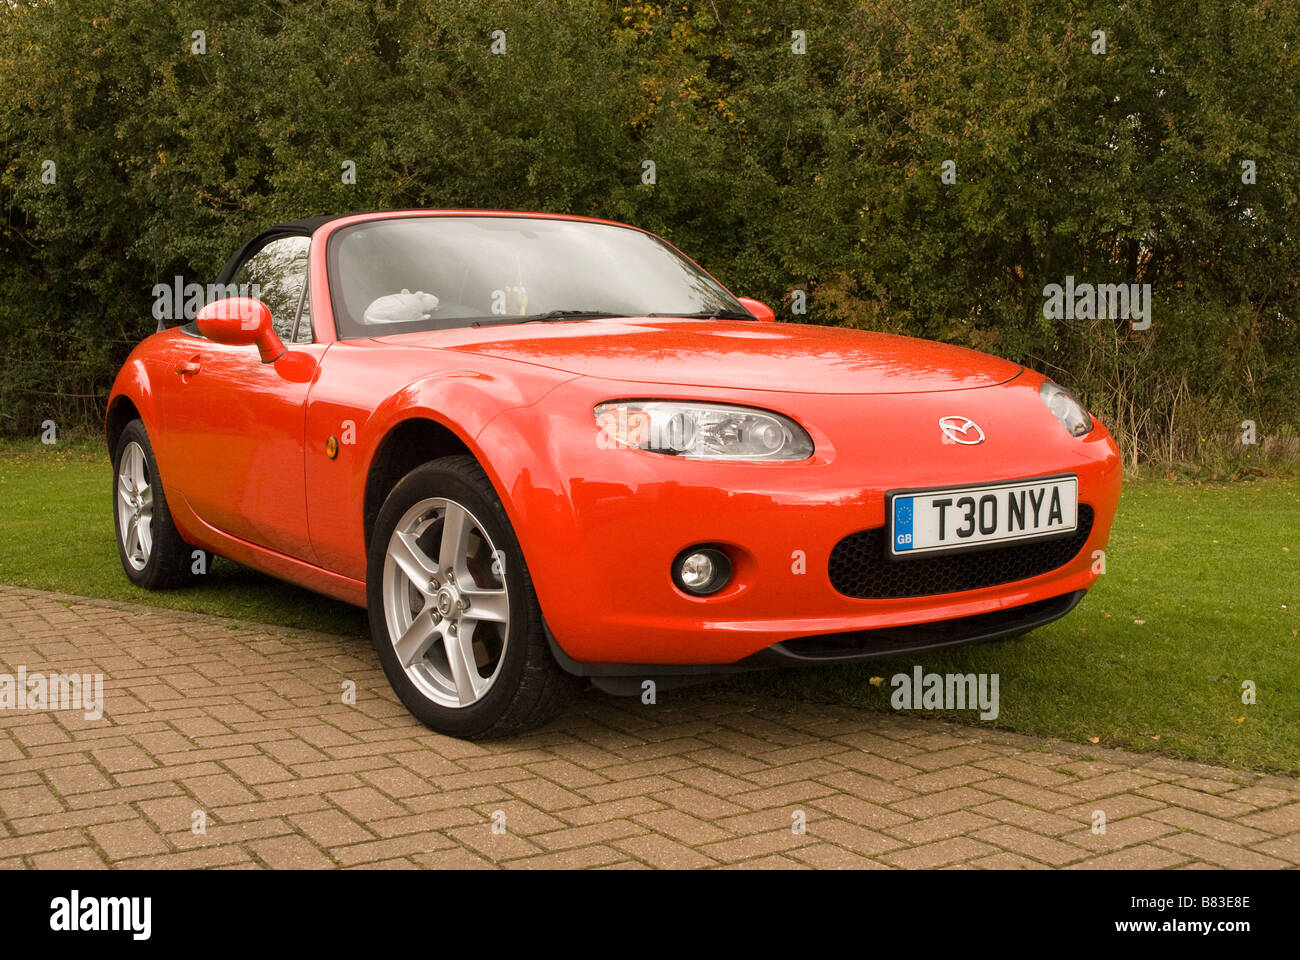 A red Mazda mx5 sports car parked on a drive outside a house Stock Photo